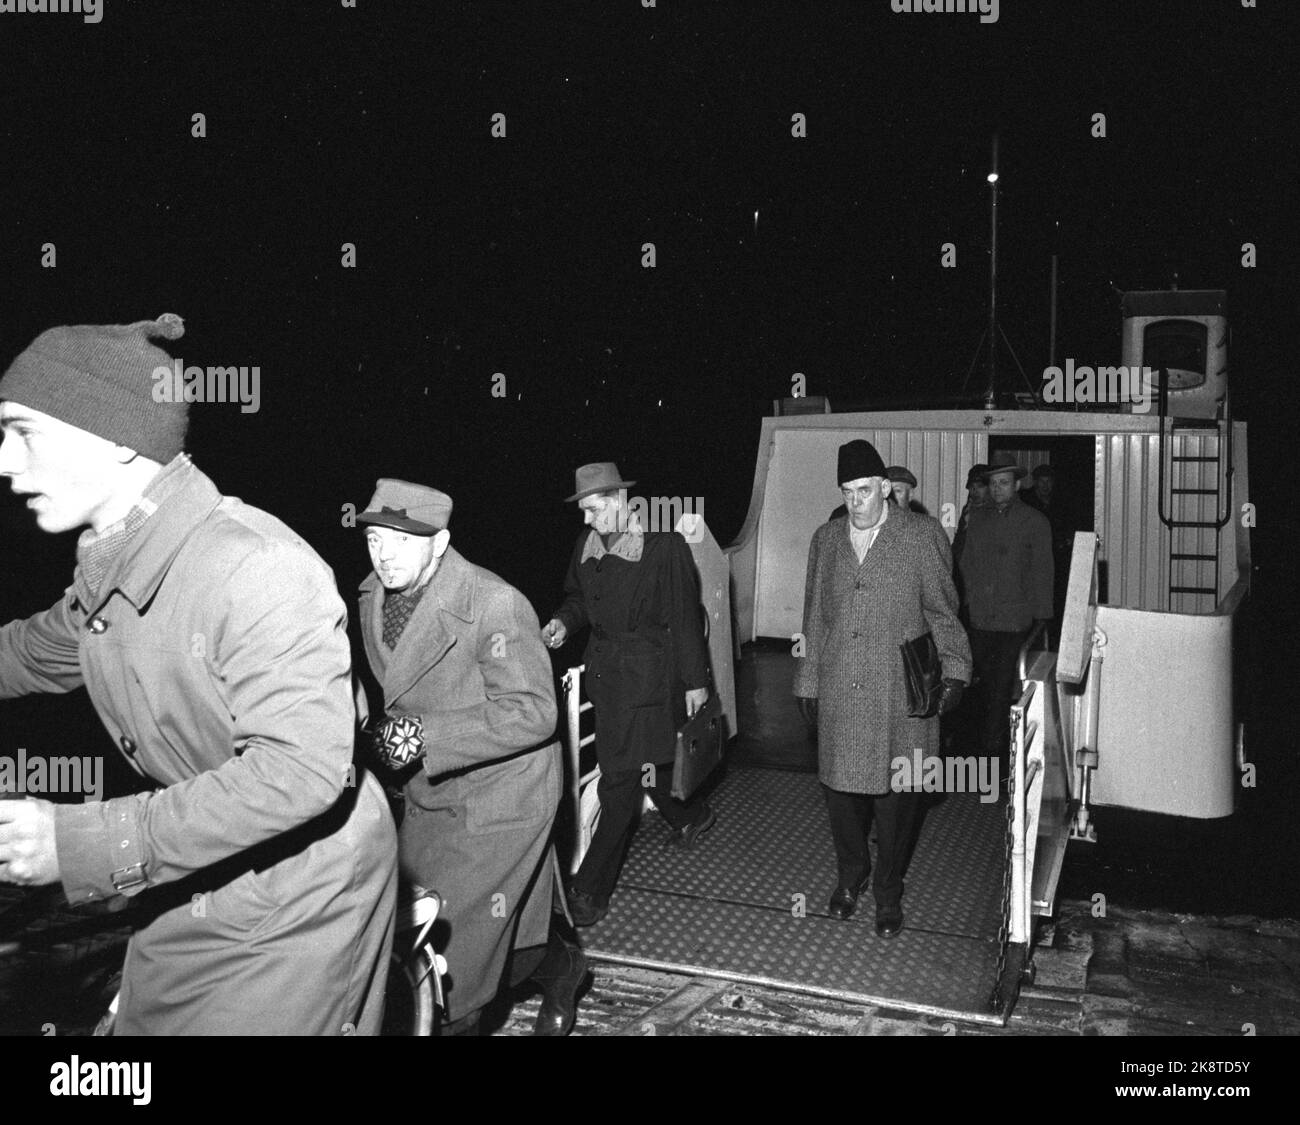 Oslo - Fredrikstad 1962. Long night's journey to work. 'While most of the population sleeps, the new' pariacast 'must out of the duvets. They have from two to four hours of travel to work every day.' Report on commuting from Fredrikstad. Here P. Mosgaard on the ferry over Glomma. Photo: Ivar Aaserud / Current / NTB Stock Photo